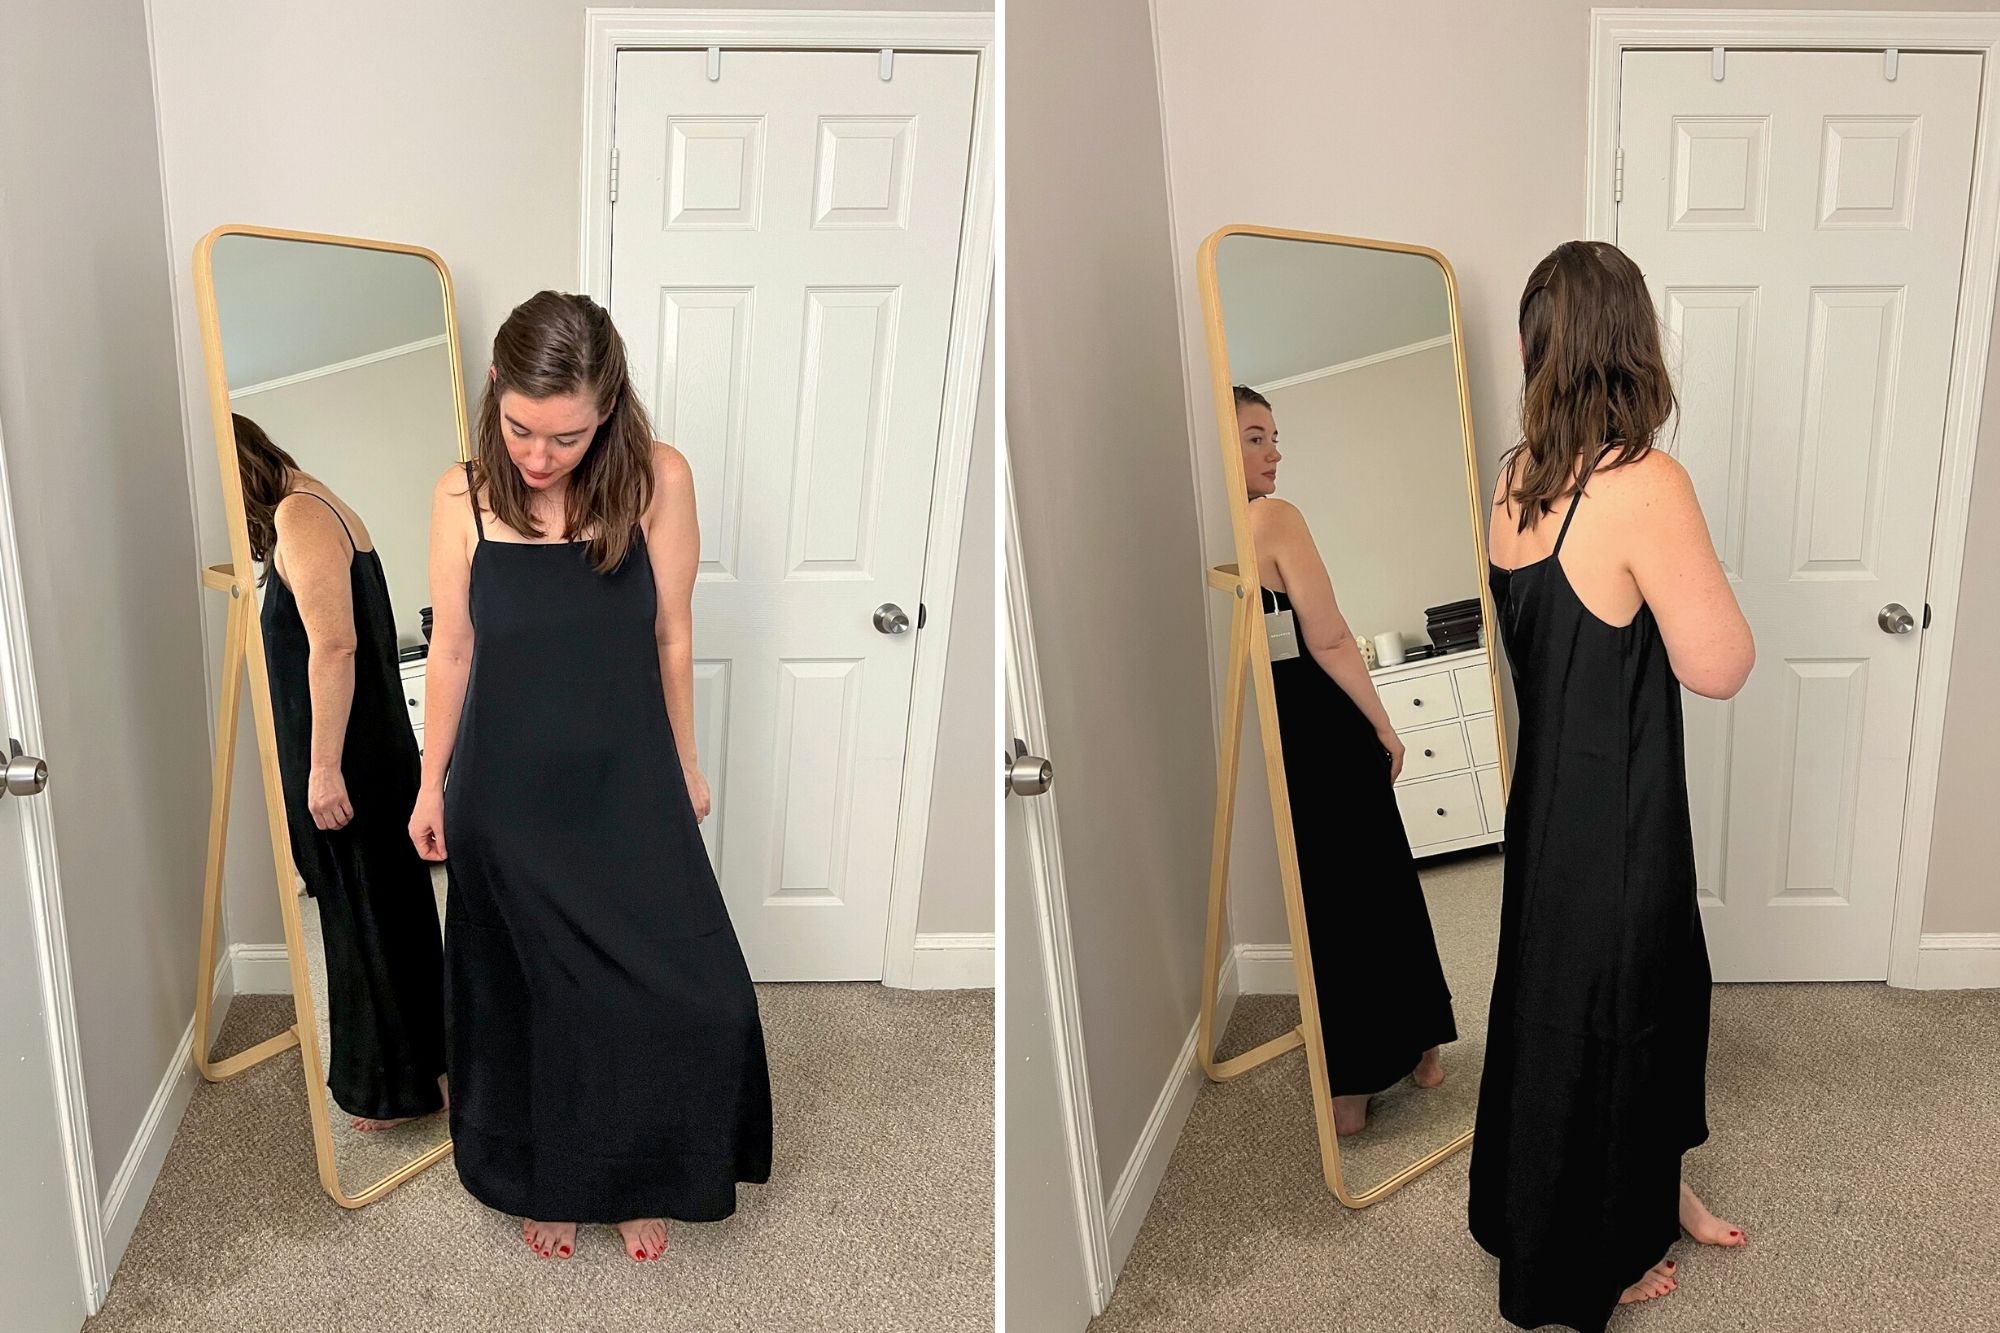 Alyssa wears the dress in two images